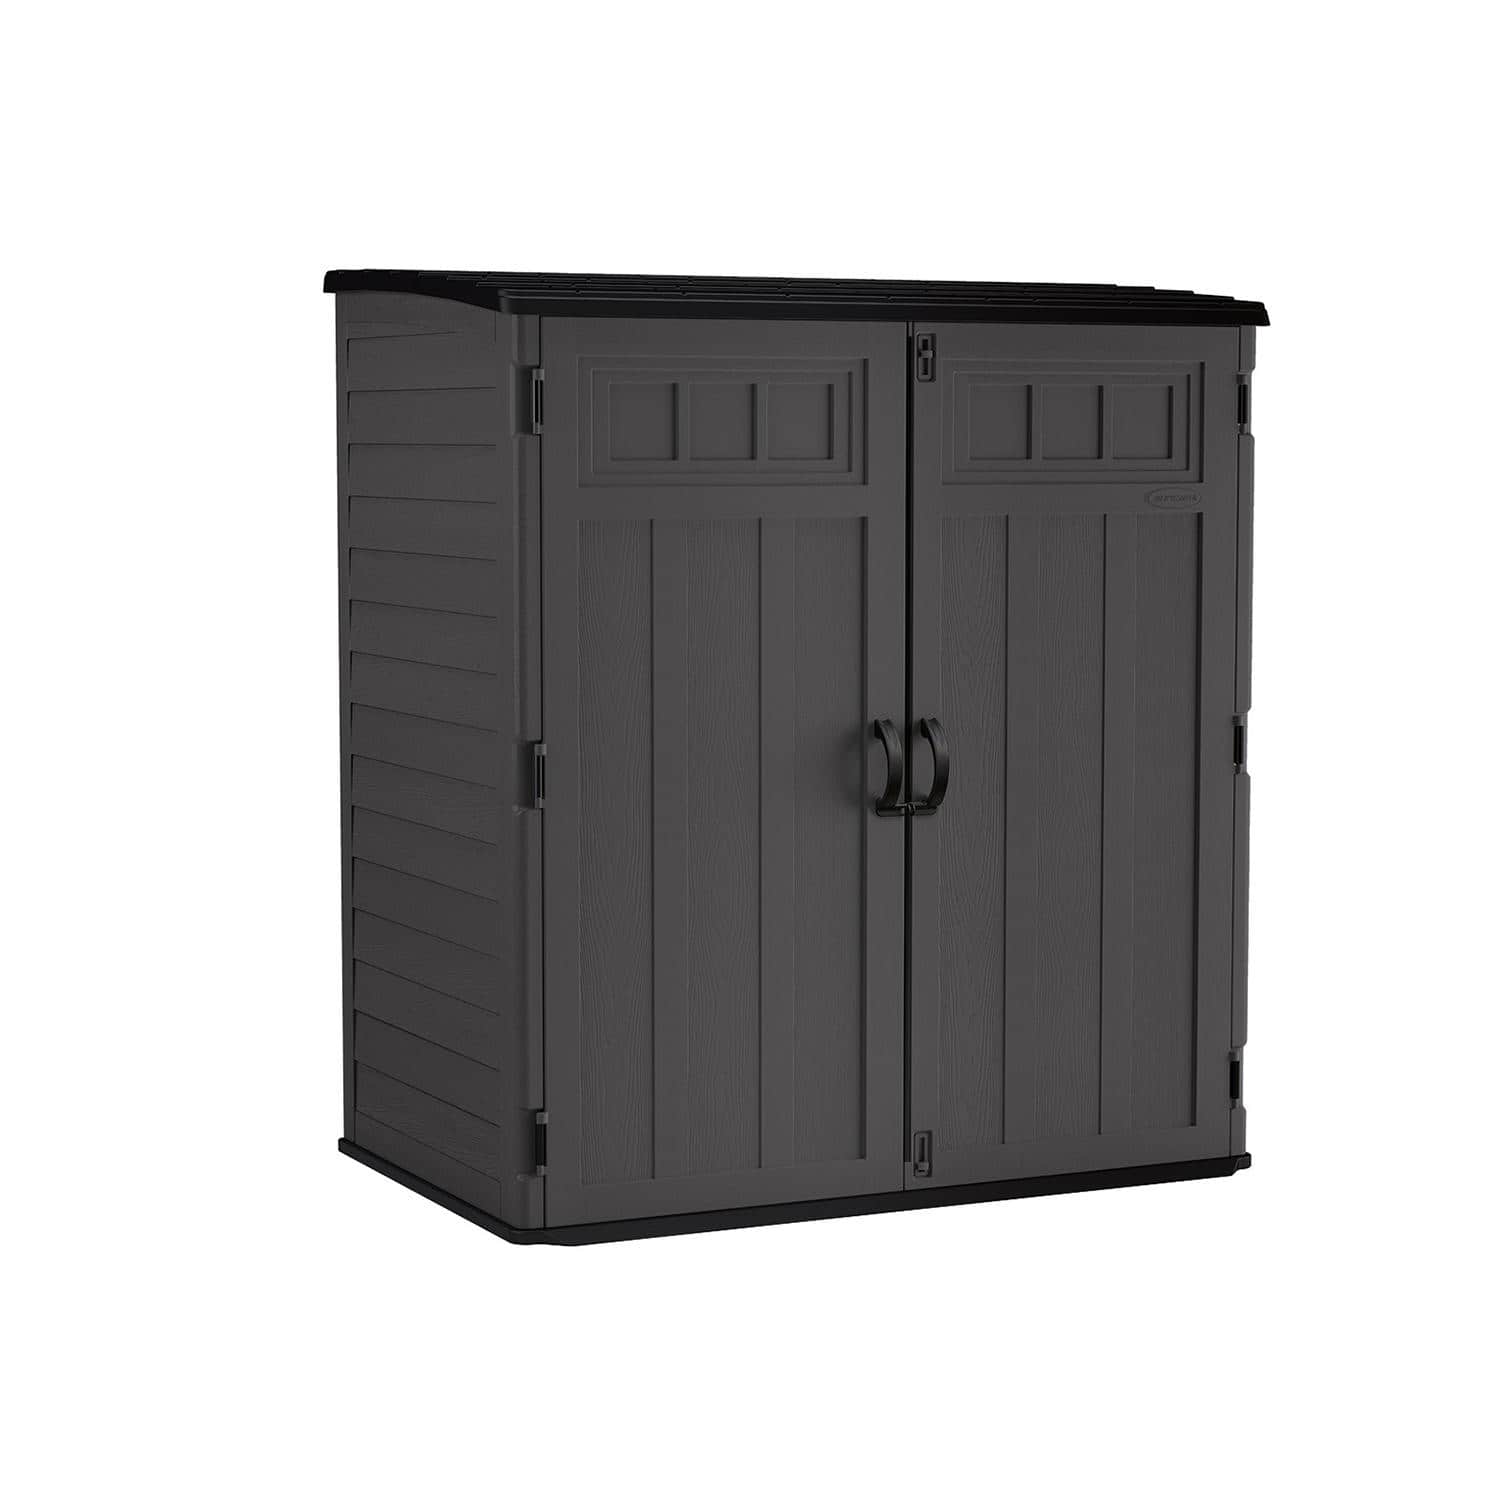 Suncast Extra Large Vertical Outdoor Storage Shed 6x4 $219.98